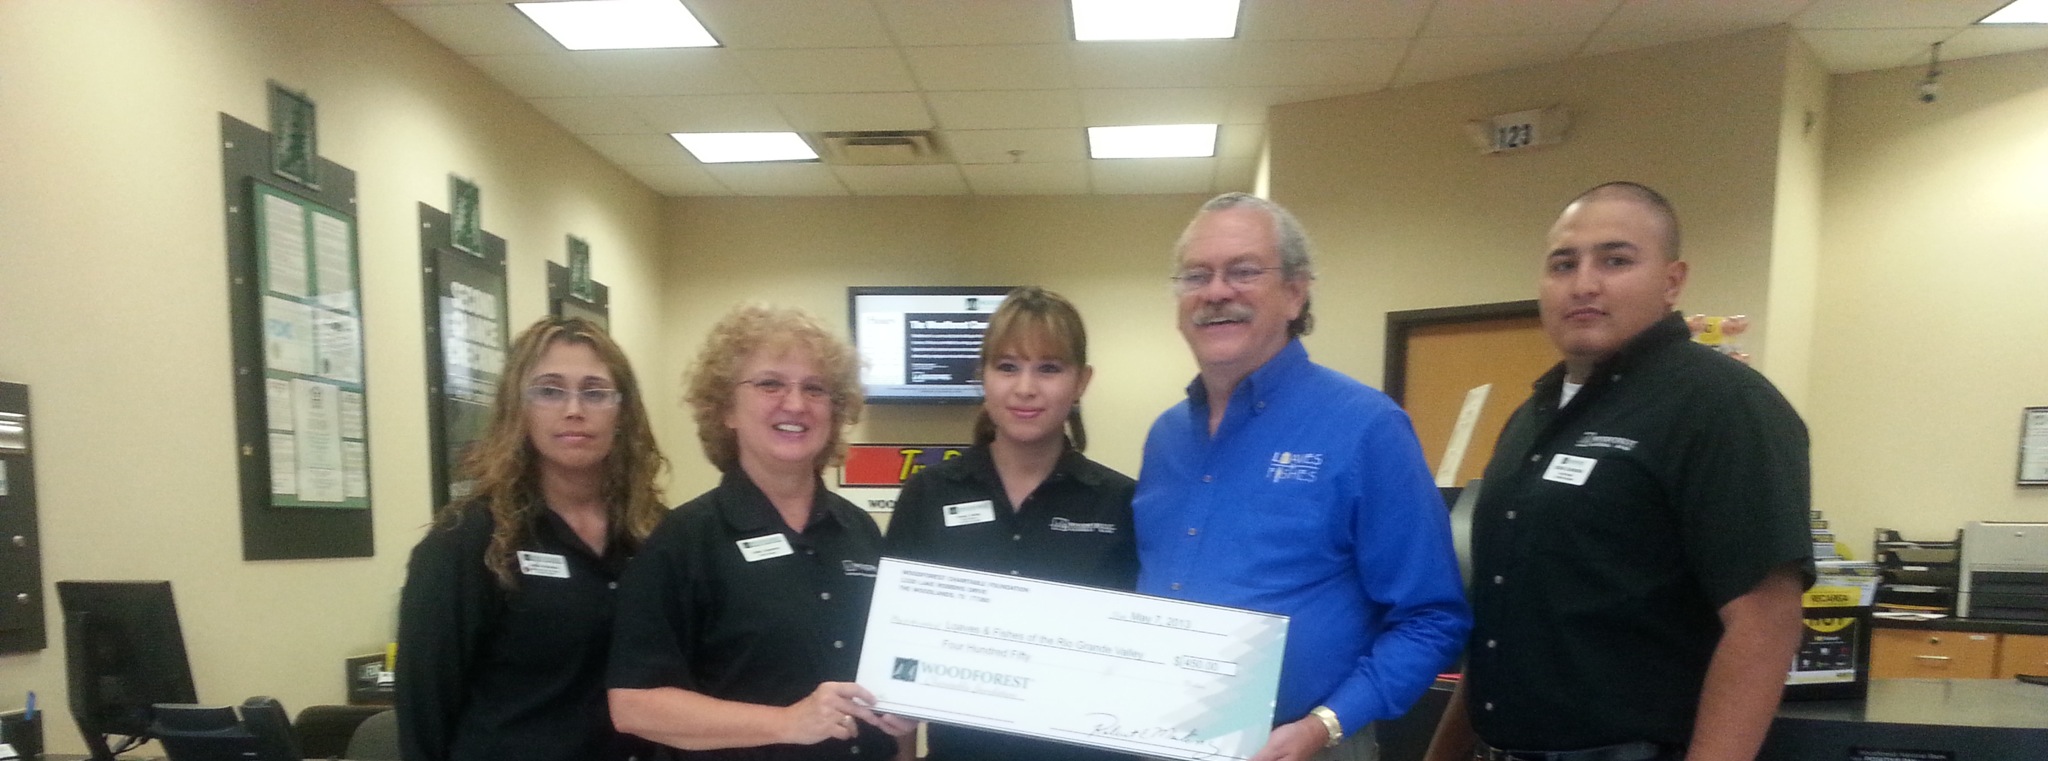 Loaves & Fishes of the Rio Grande Valley receives $450 donation from Woodforest Charitable Foundatio